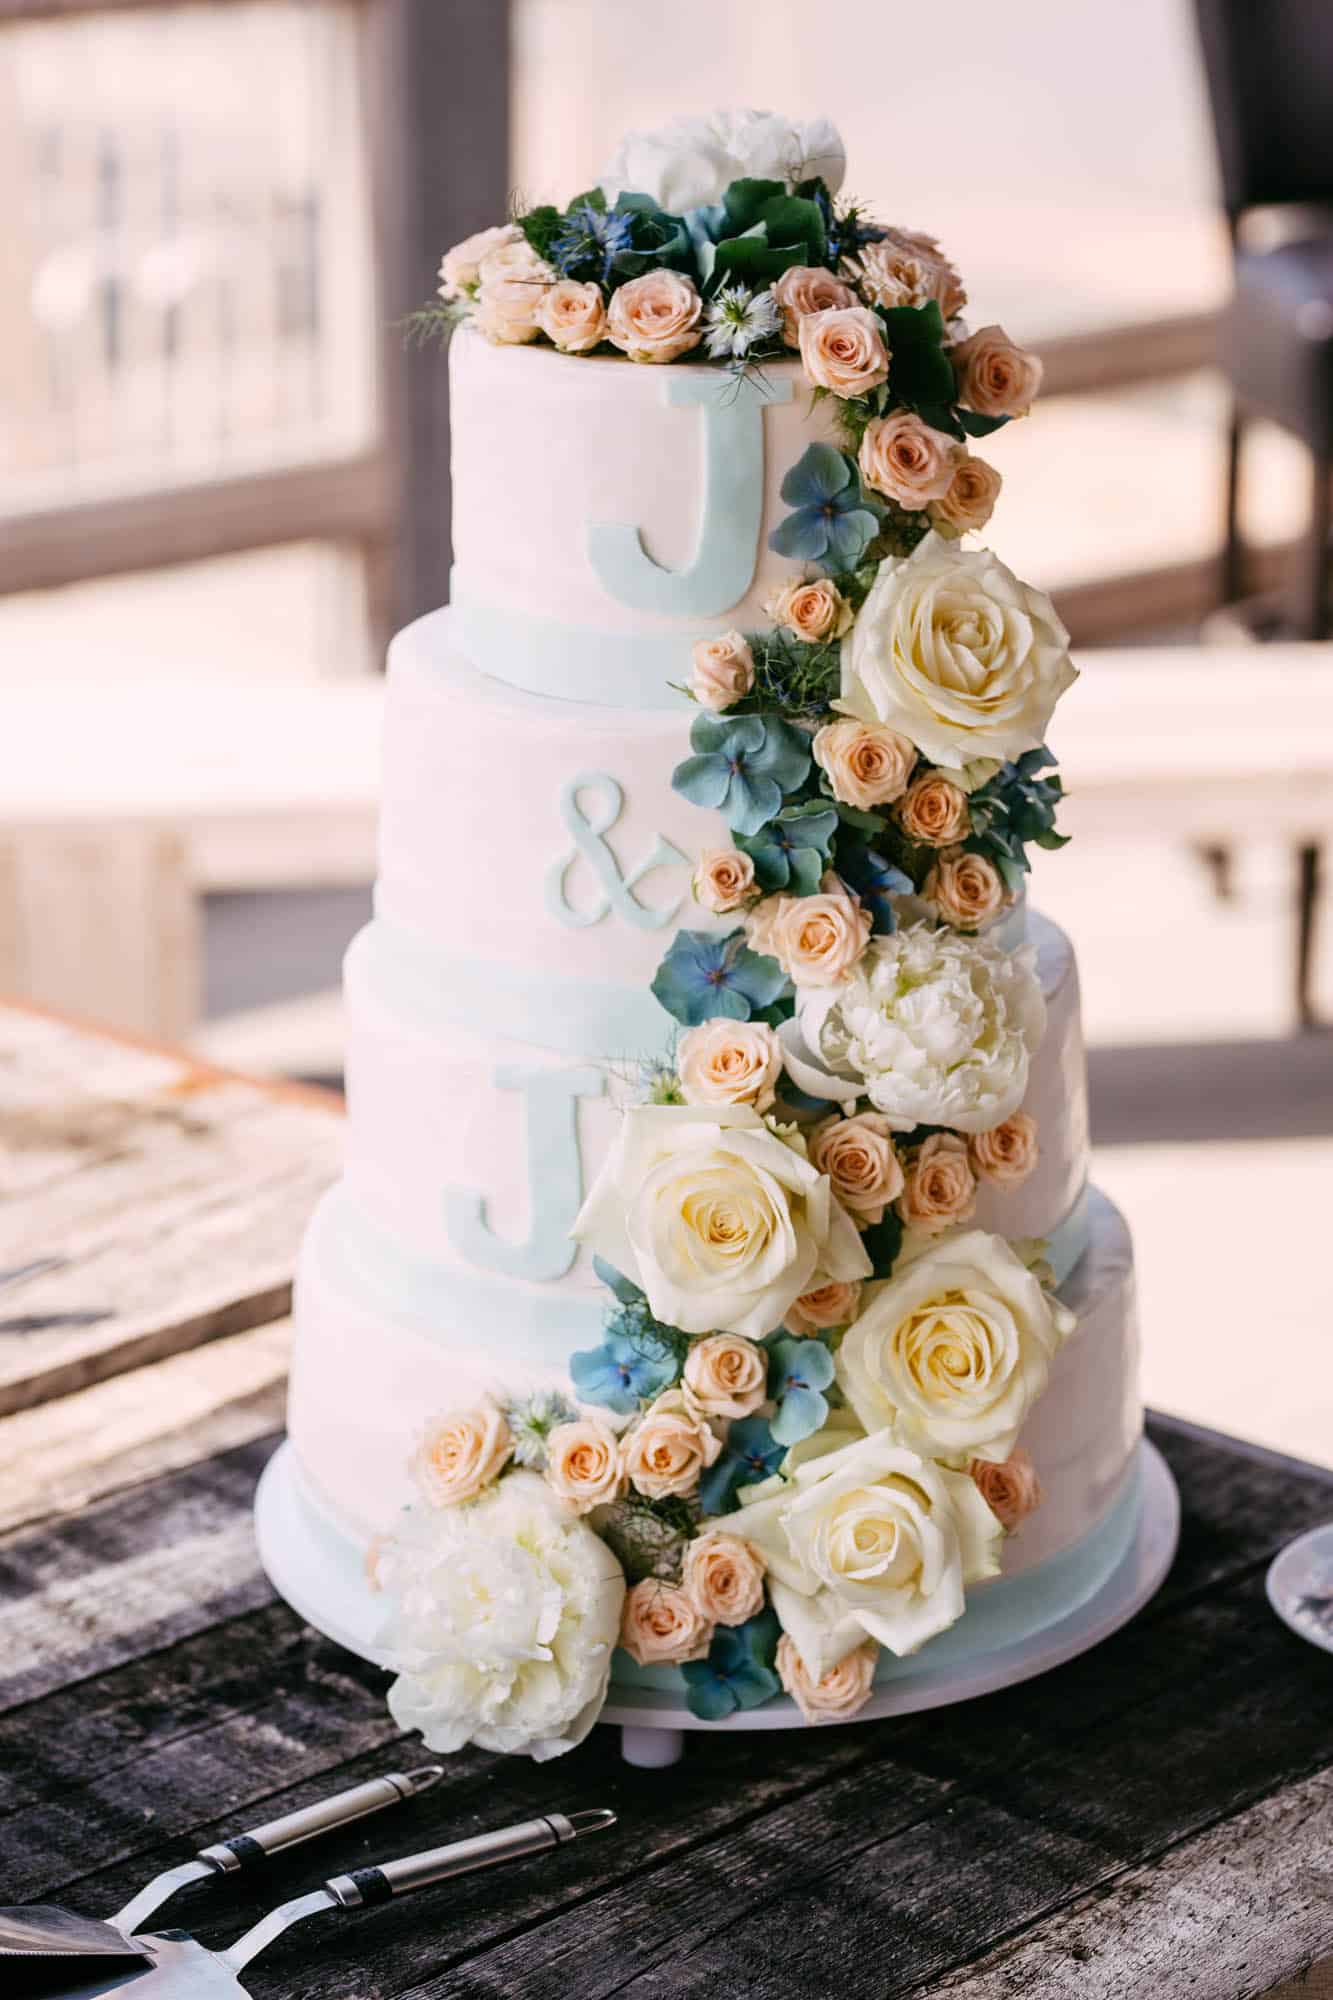     Description: A wedding cake with blue and white wedding cakes on top.